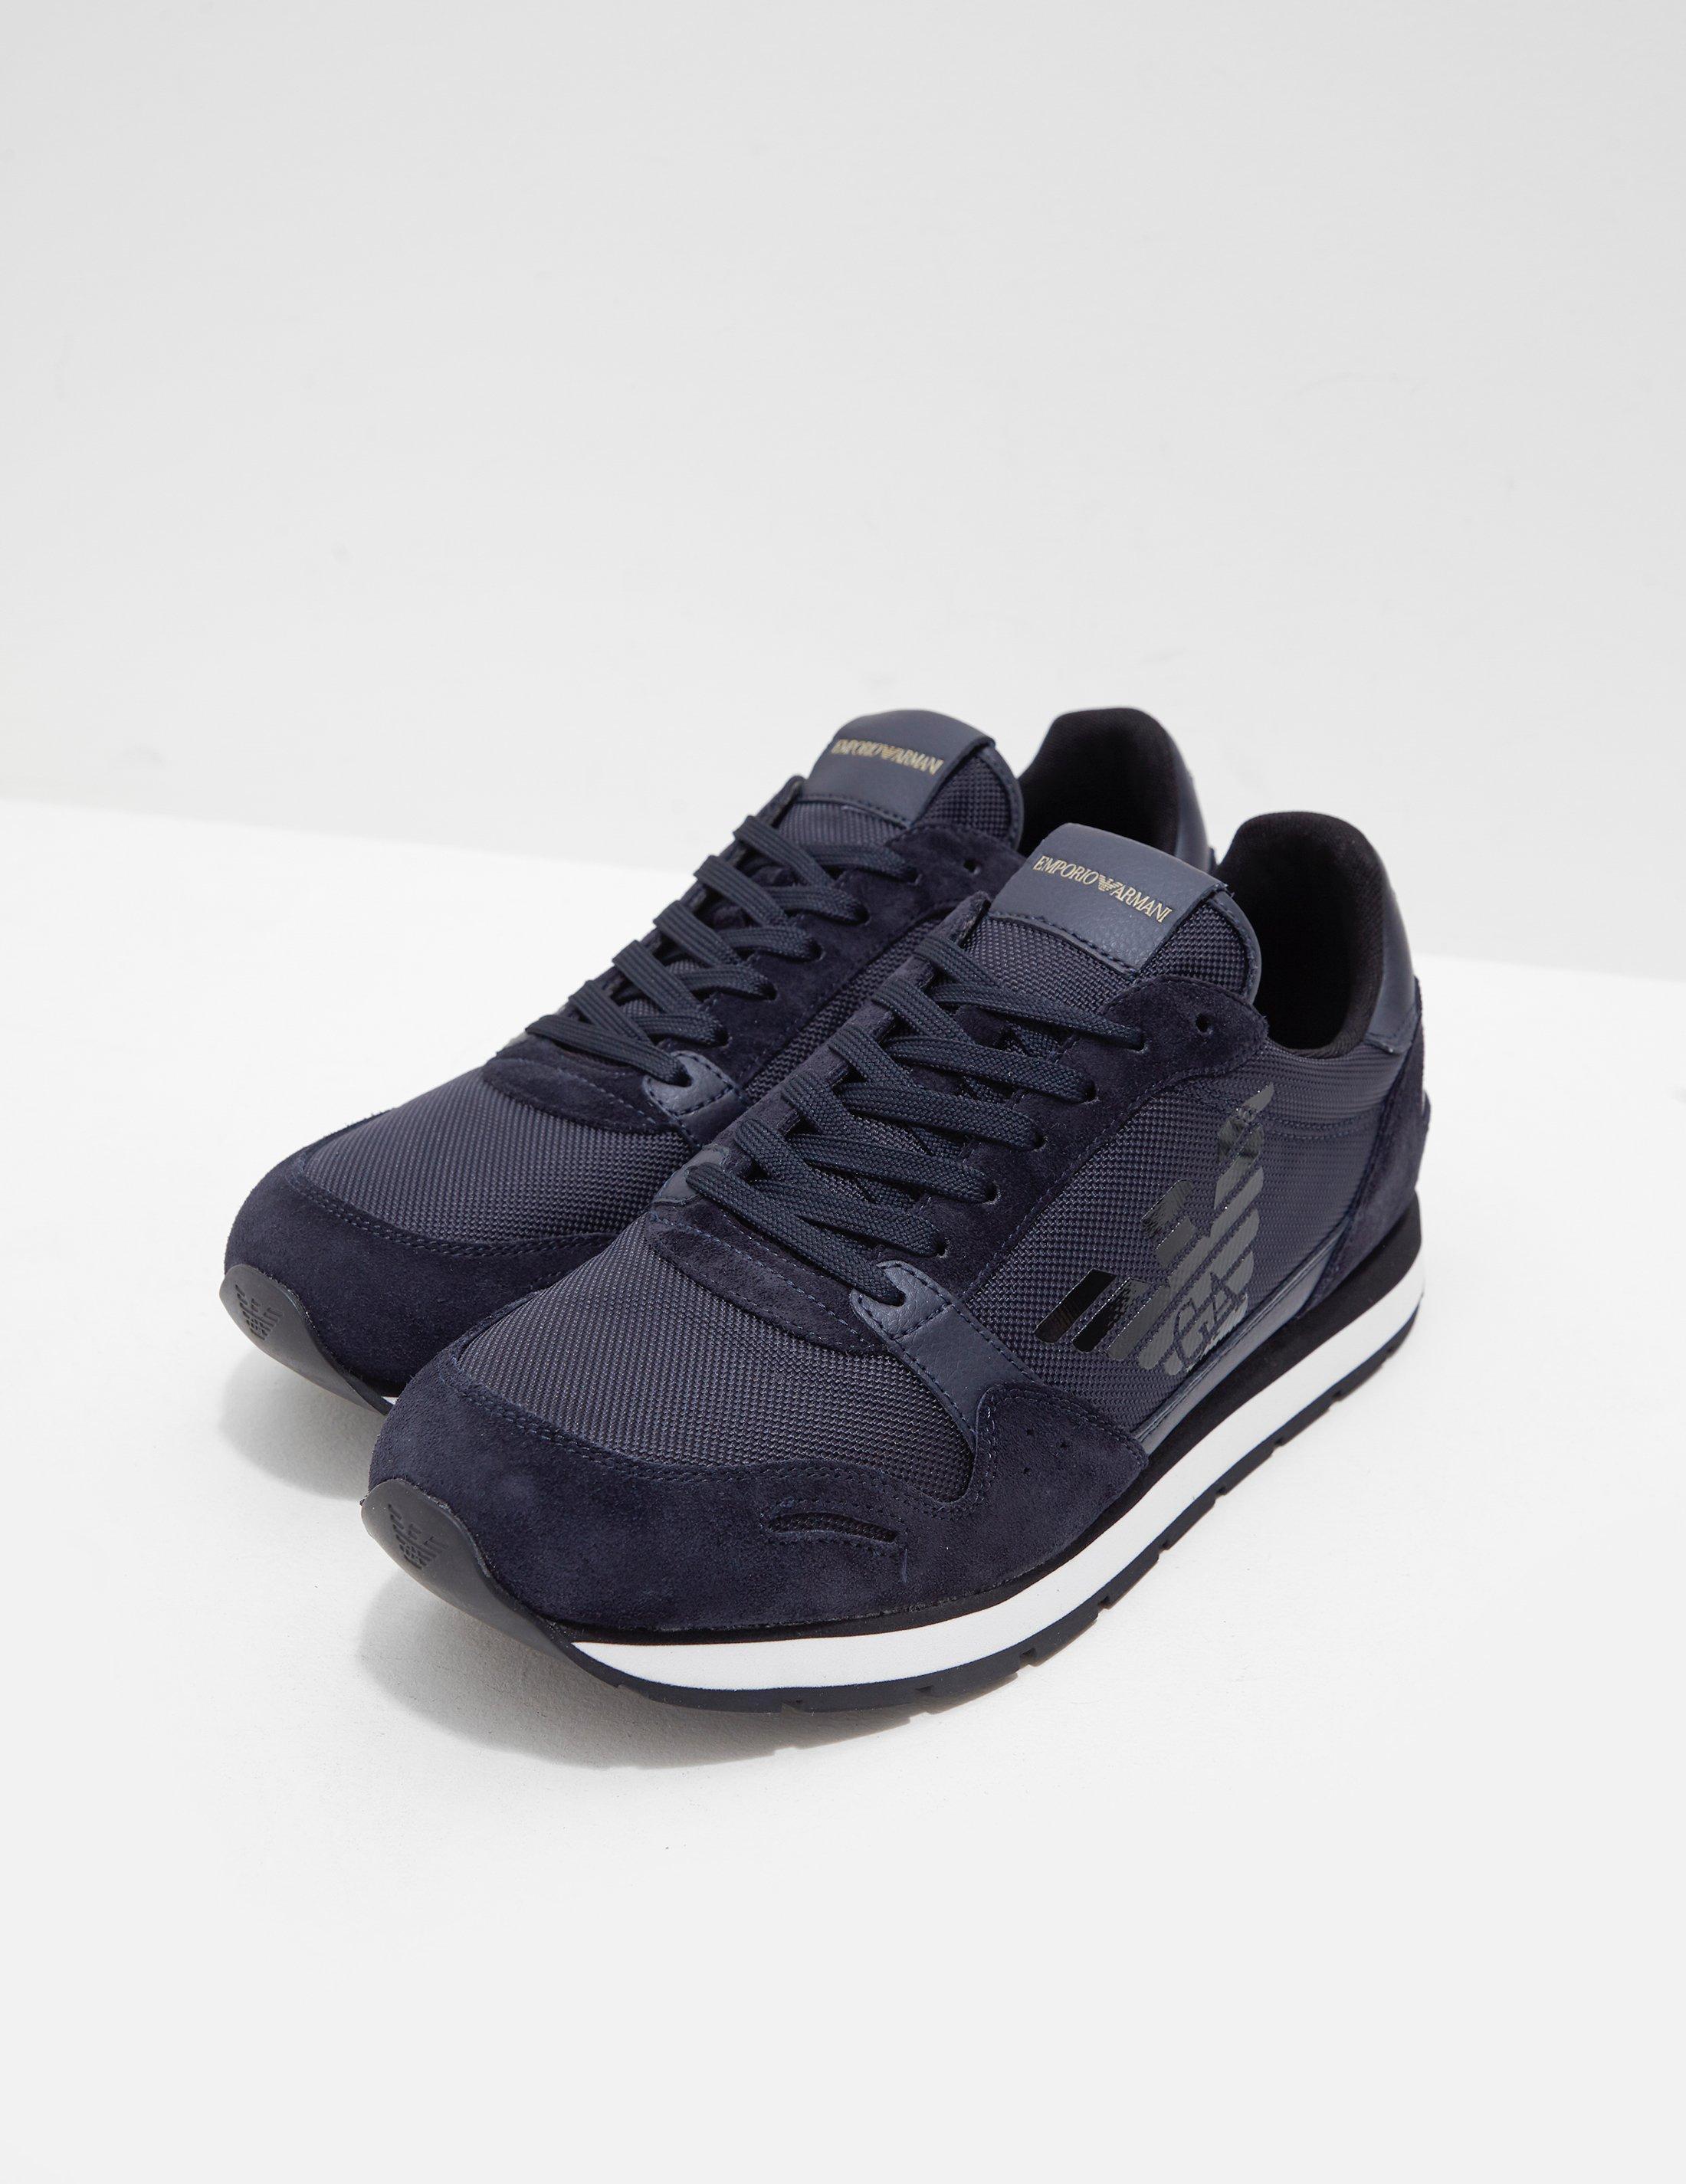 Emporio Armani Suede Trainers Navy Blue for Men - Lyst